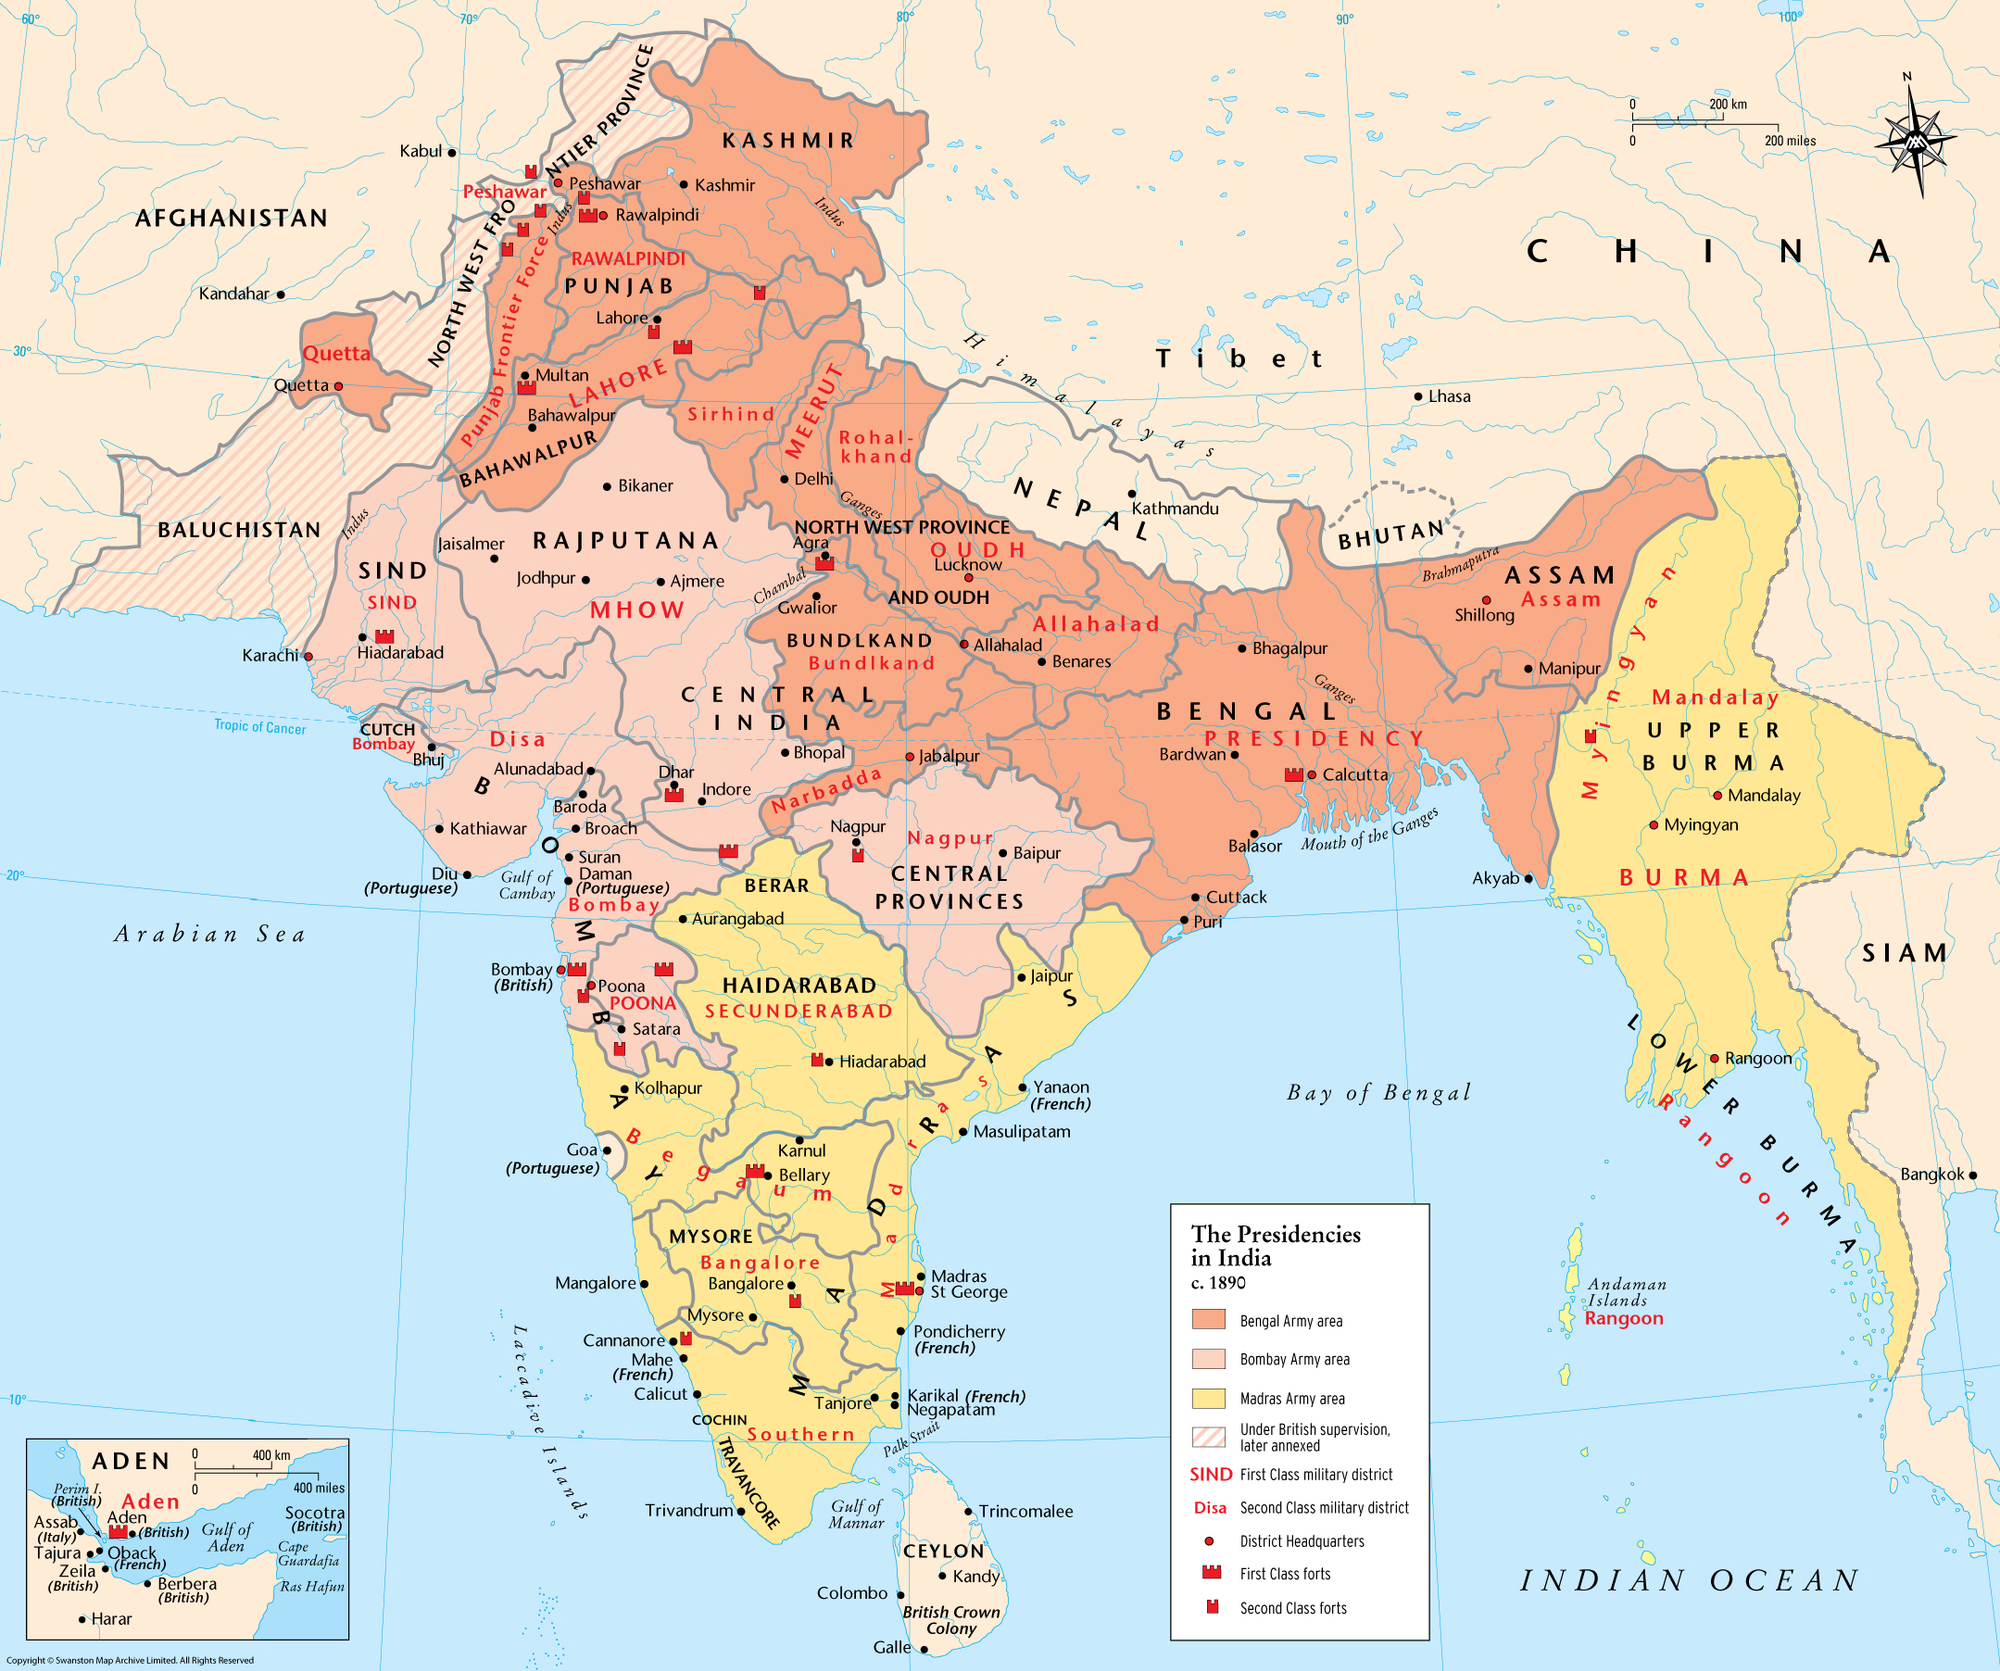 India in 1890. Source: The Map Archive.